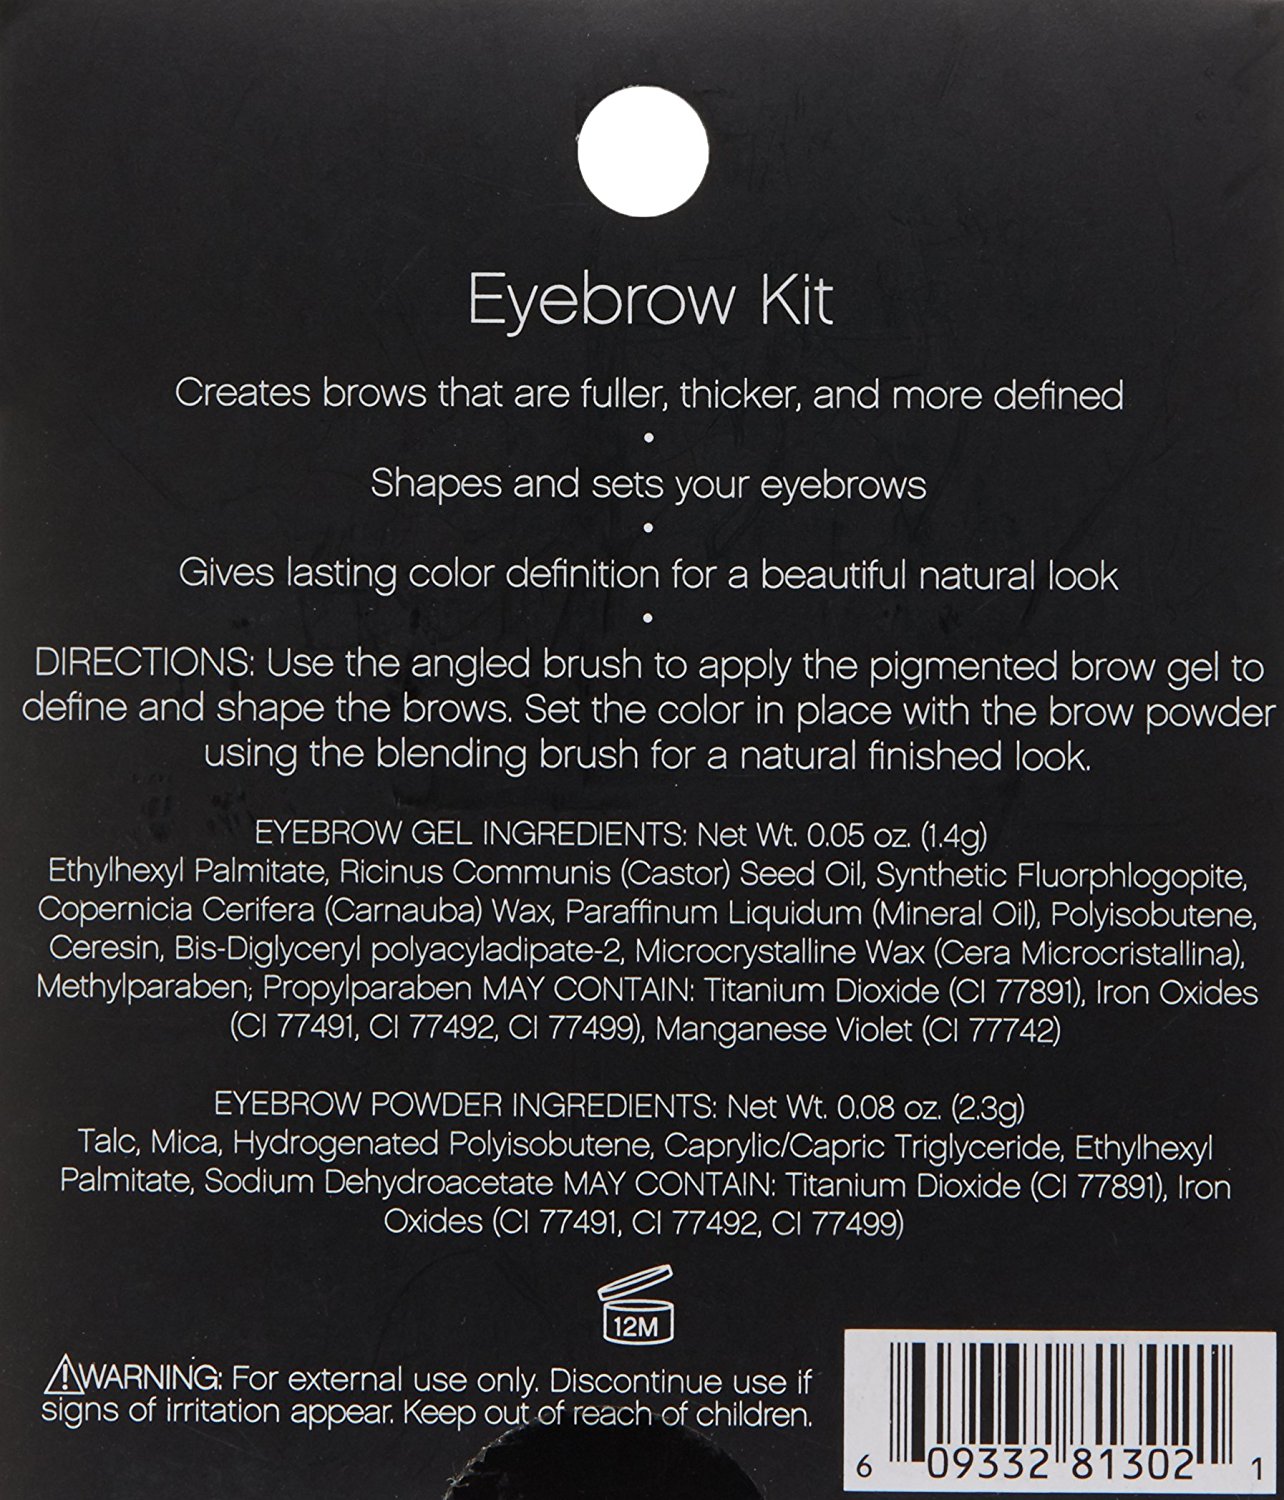 Top 10 Best Eyebrow Products for Beginners - Reviews of Eyebrow Products